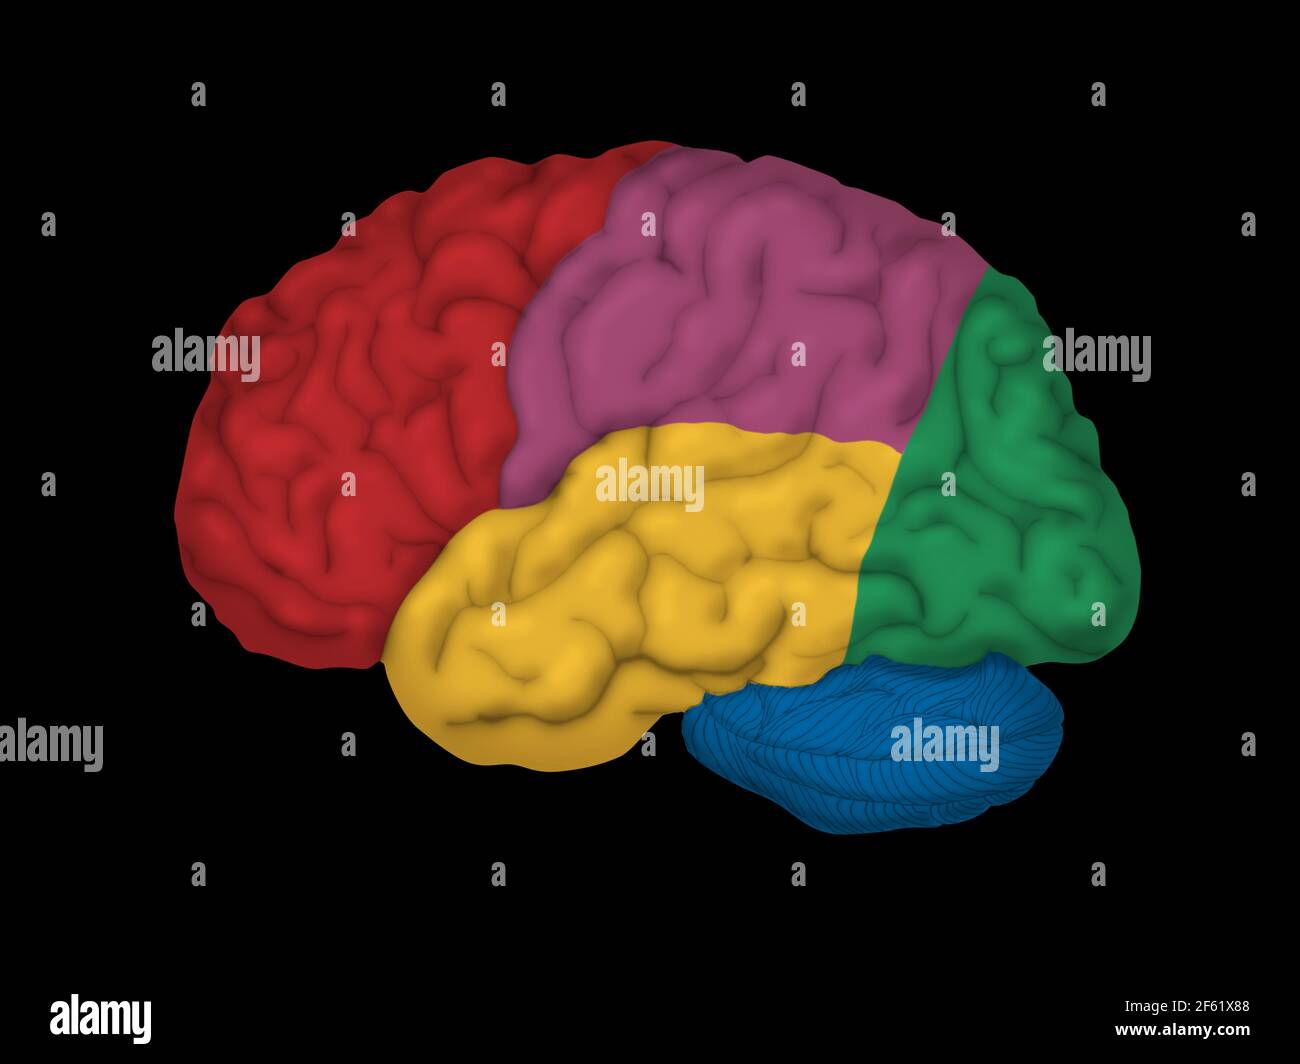 Human Brain, Lateral View Stock Photo